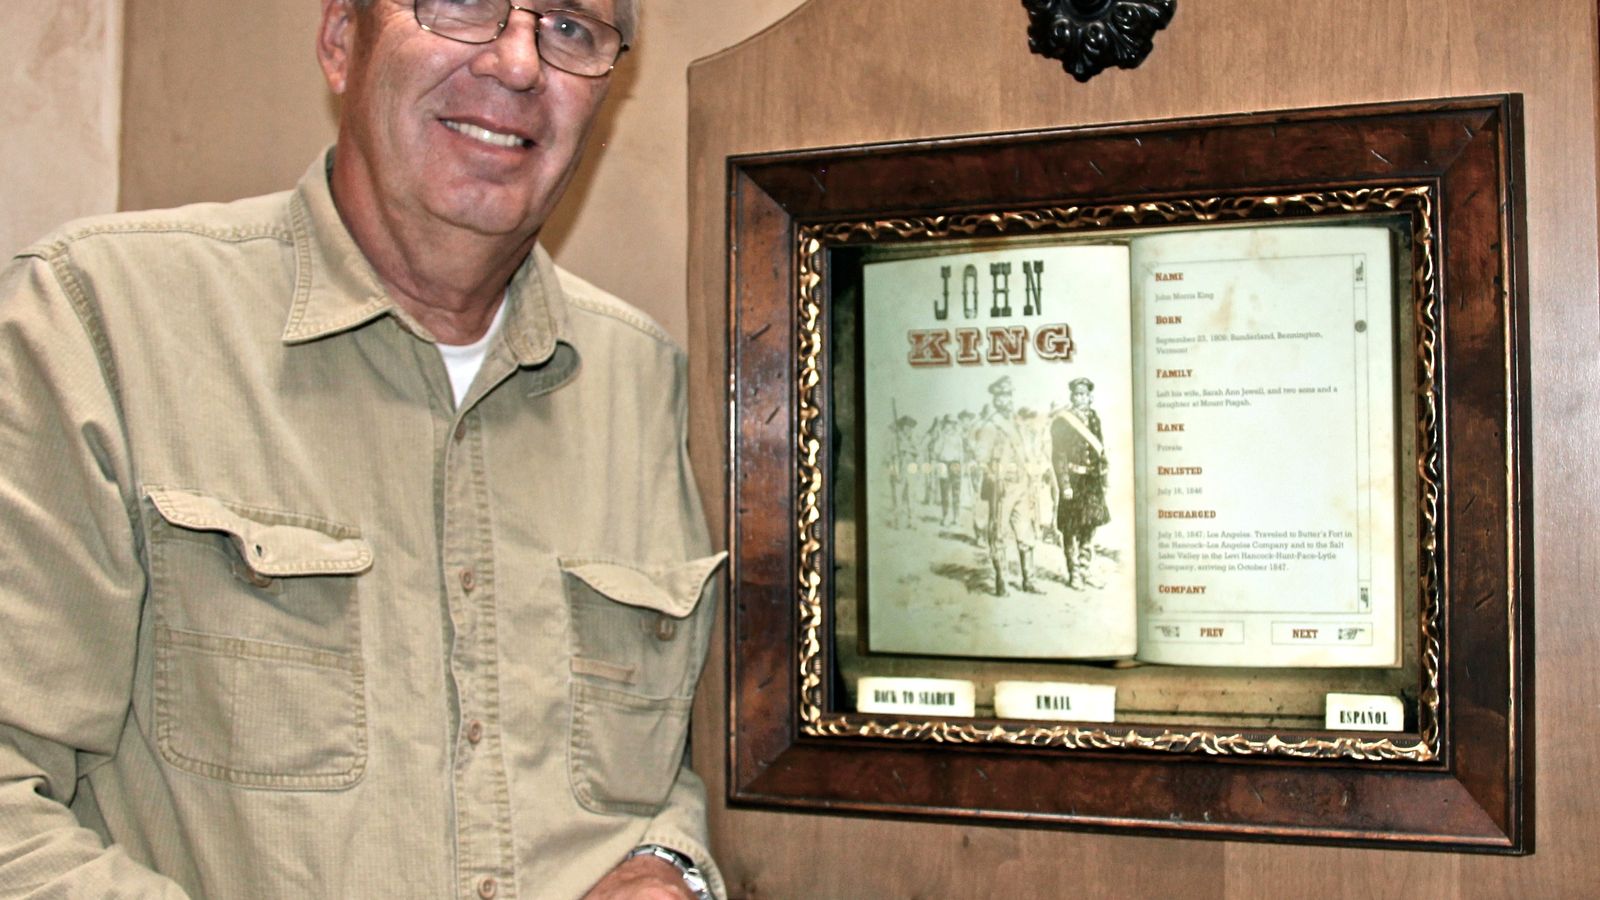 Man standing by framed image on the wall